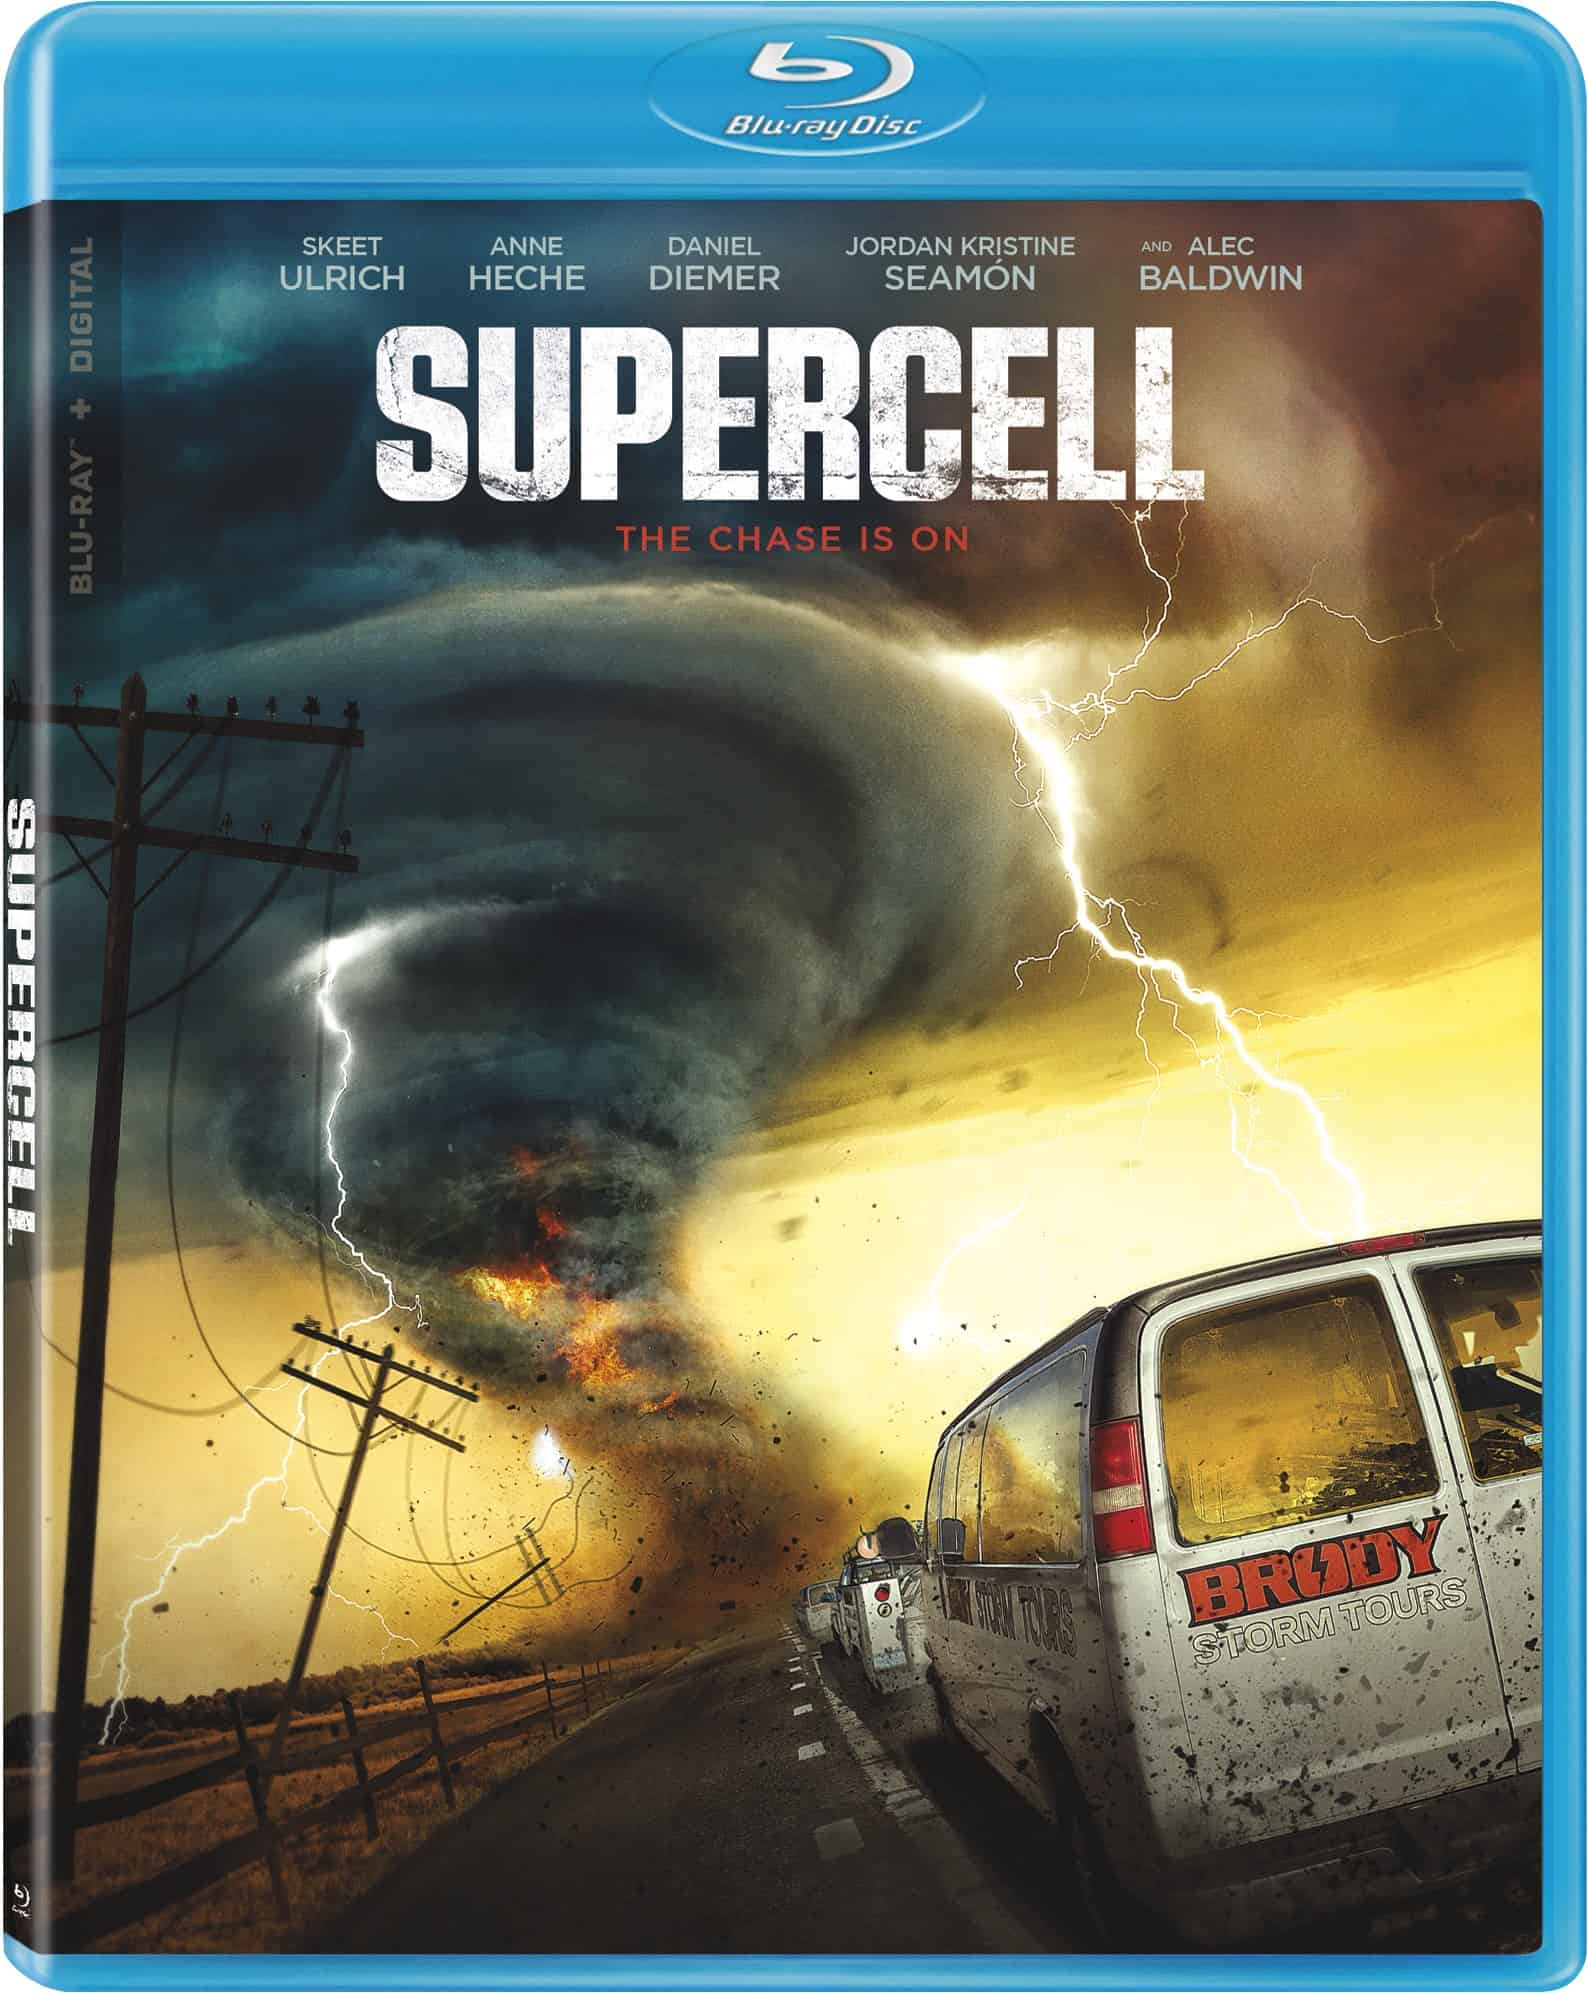 Supercell comes to Blu-ray on May 2nd 18